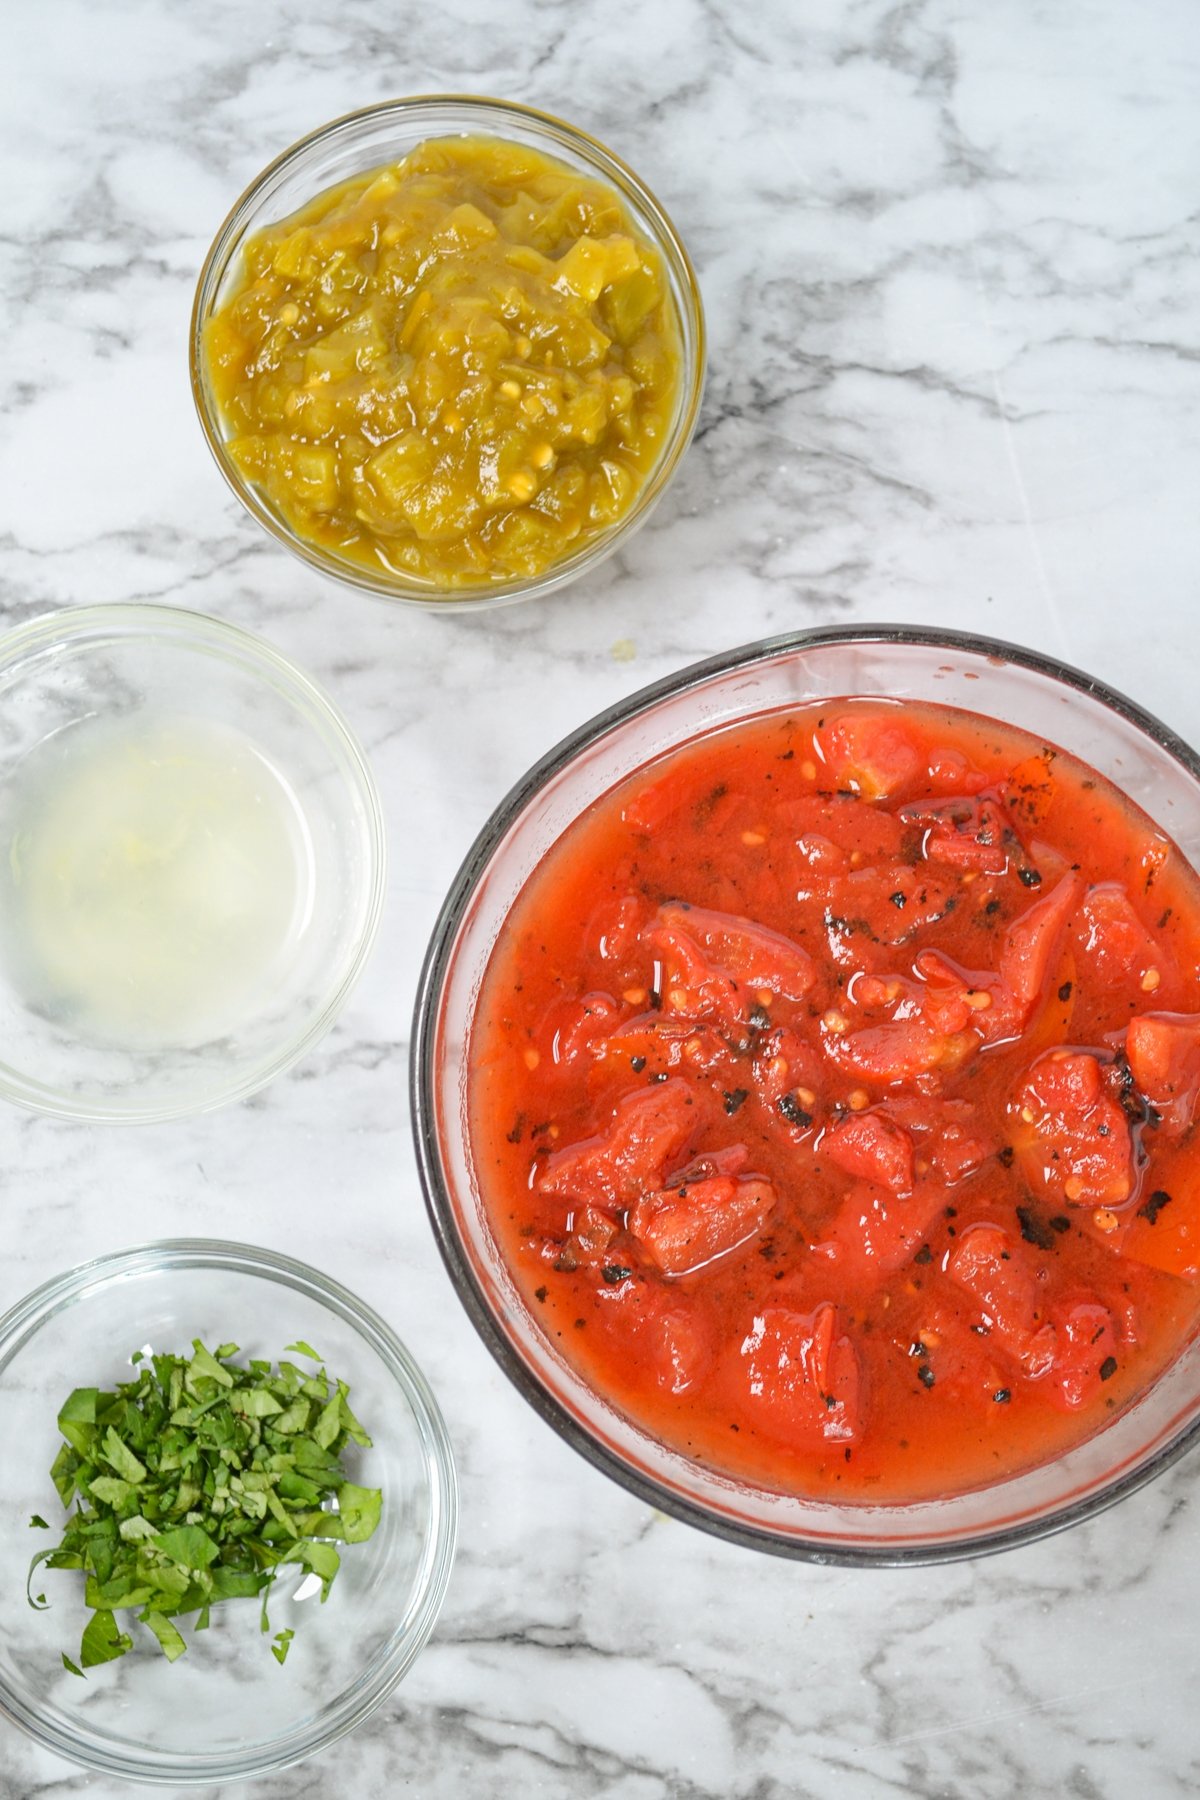 The ingredients needed to make homemade tomatoes and green chilies AKA Copycat Rotel!